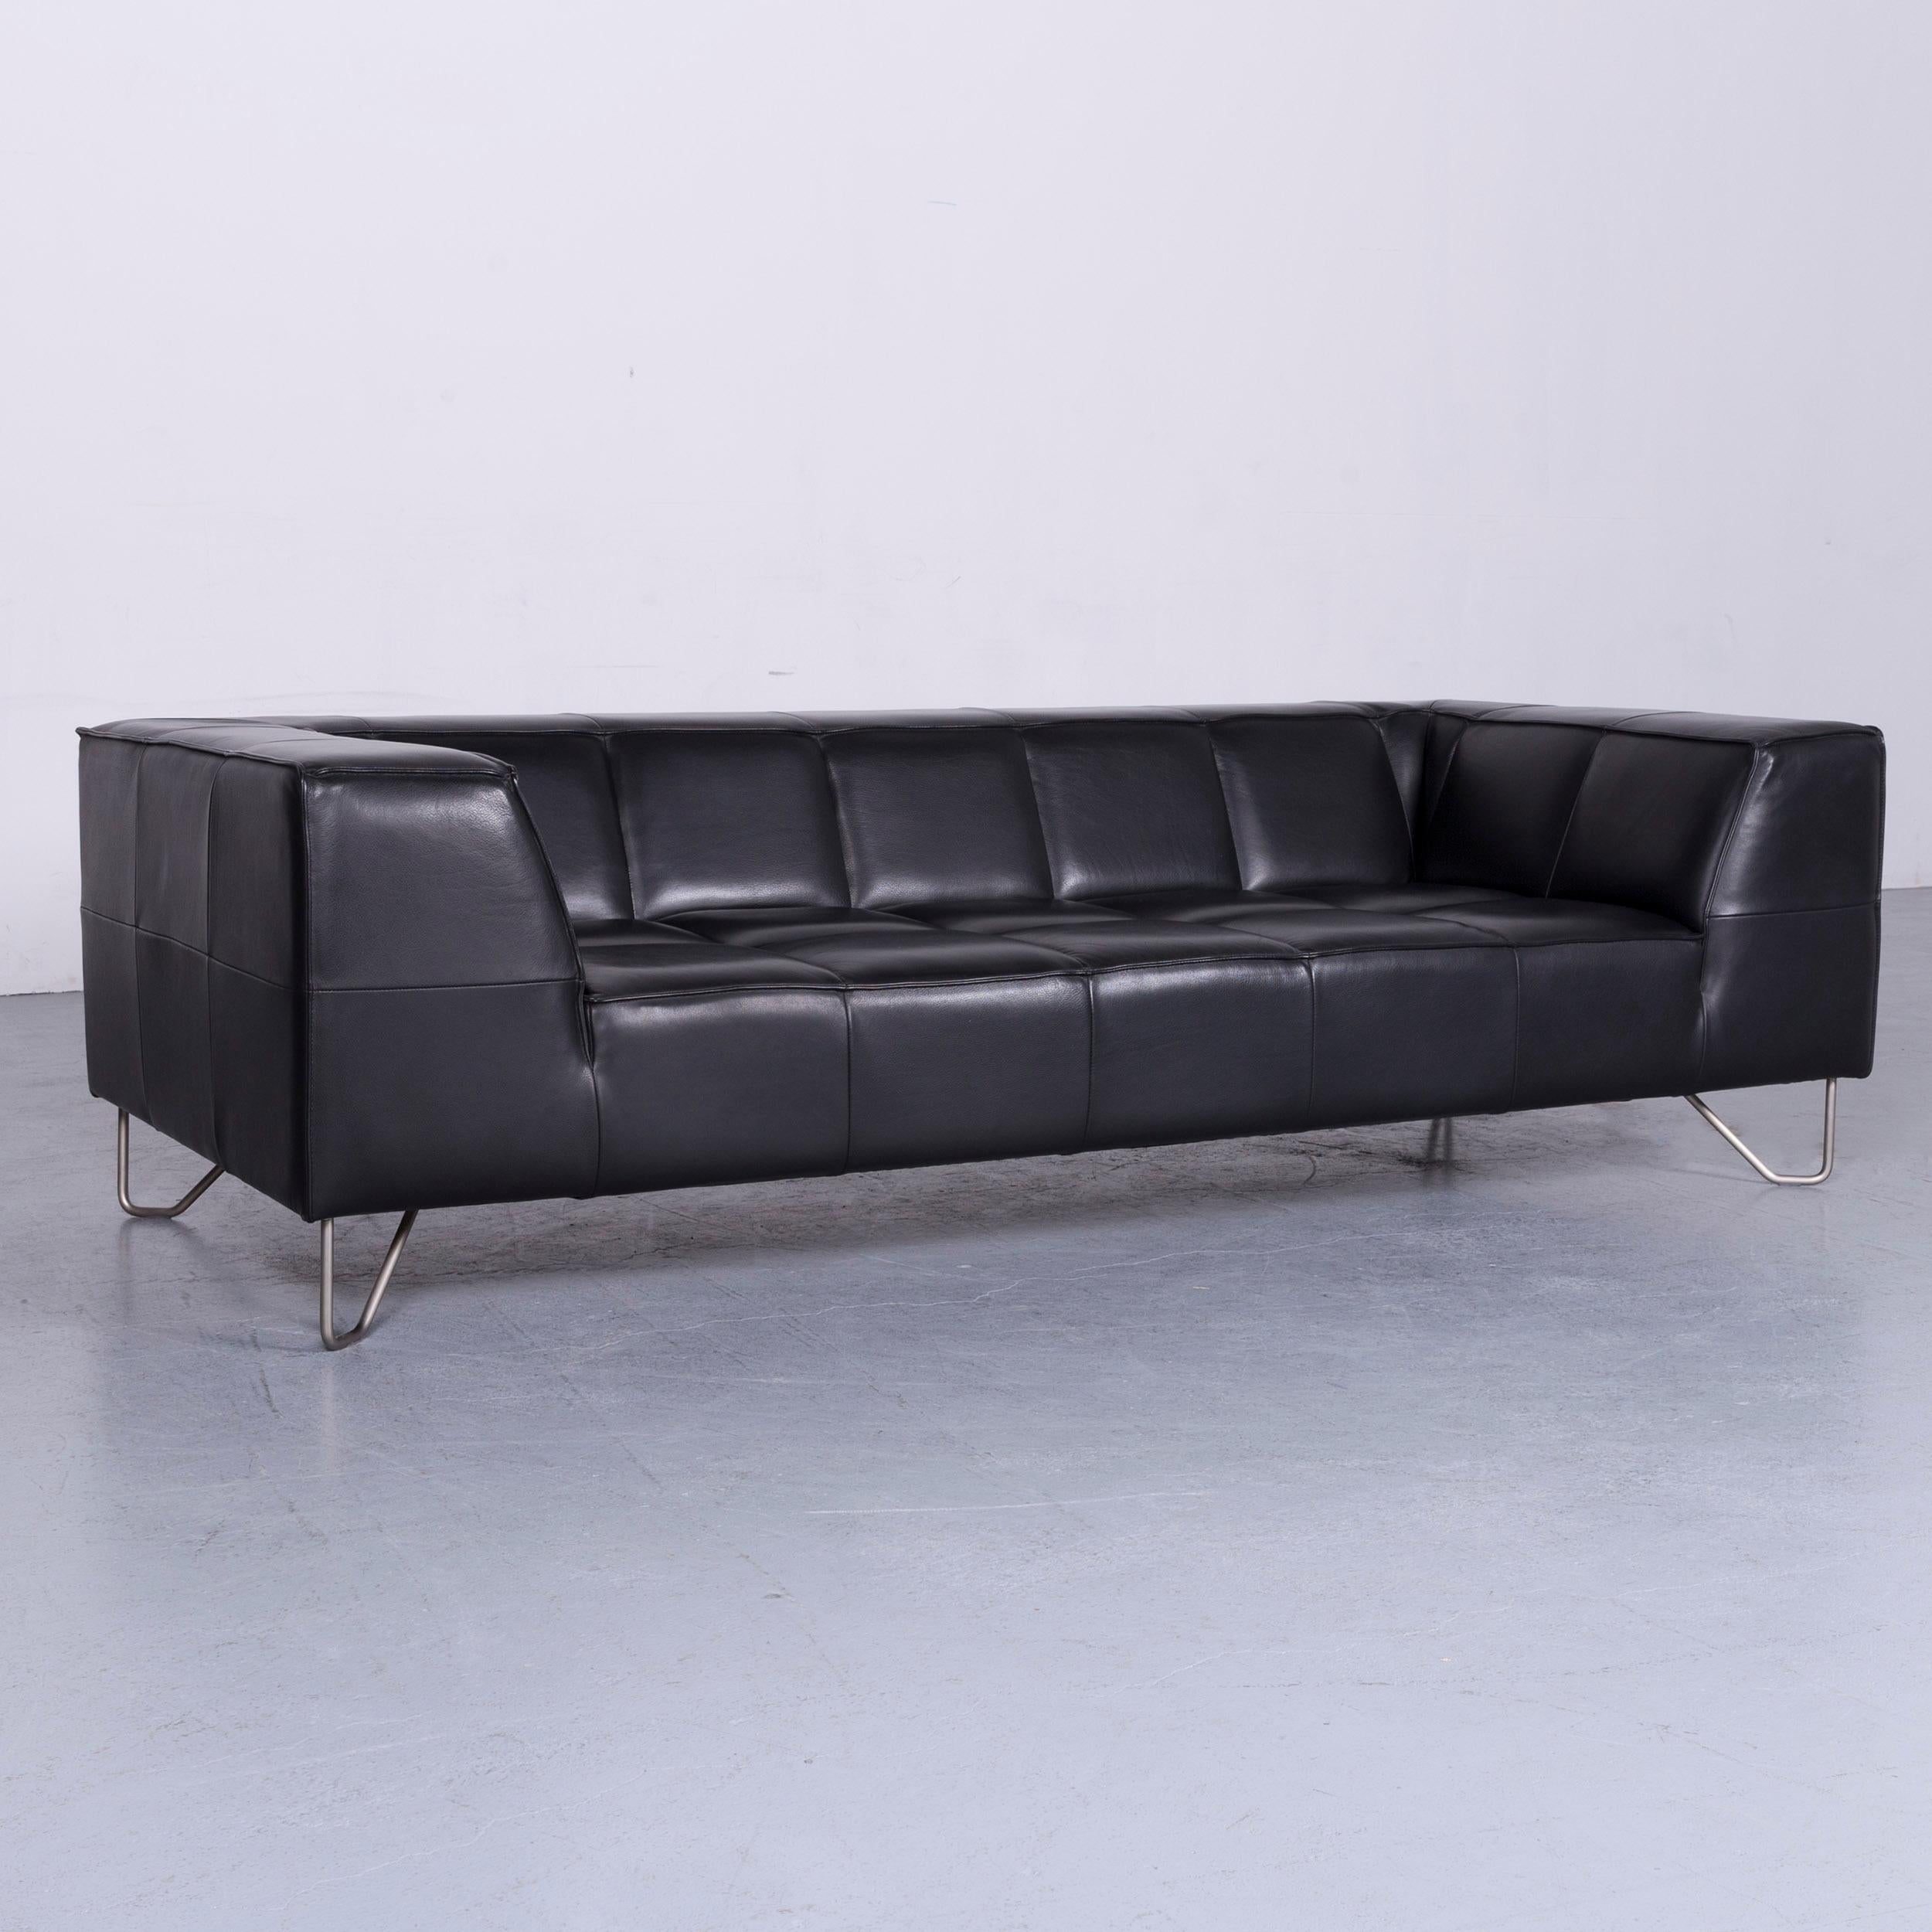 We bring to you a BoConcept Milos designer sofa black leather three-seat couch.